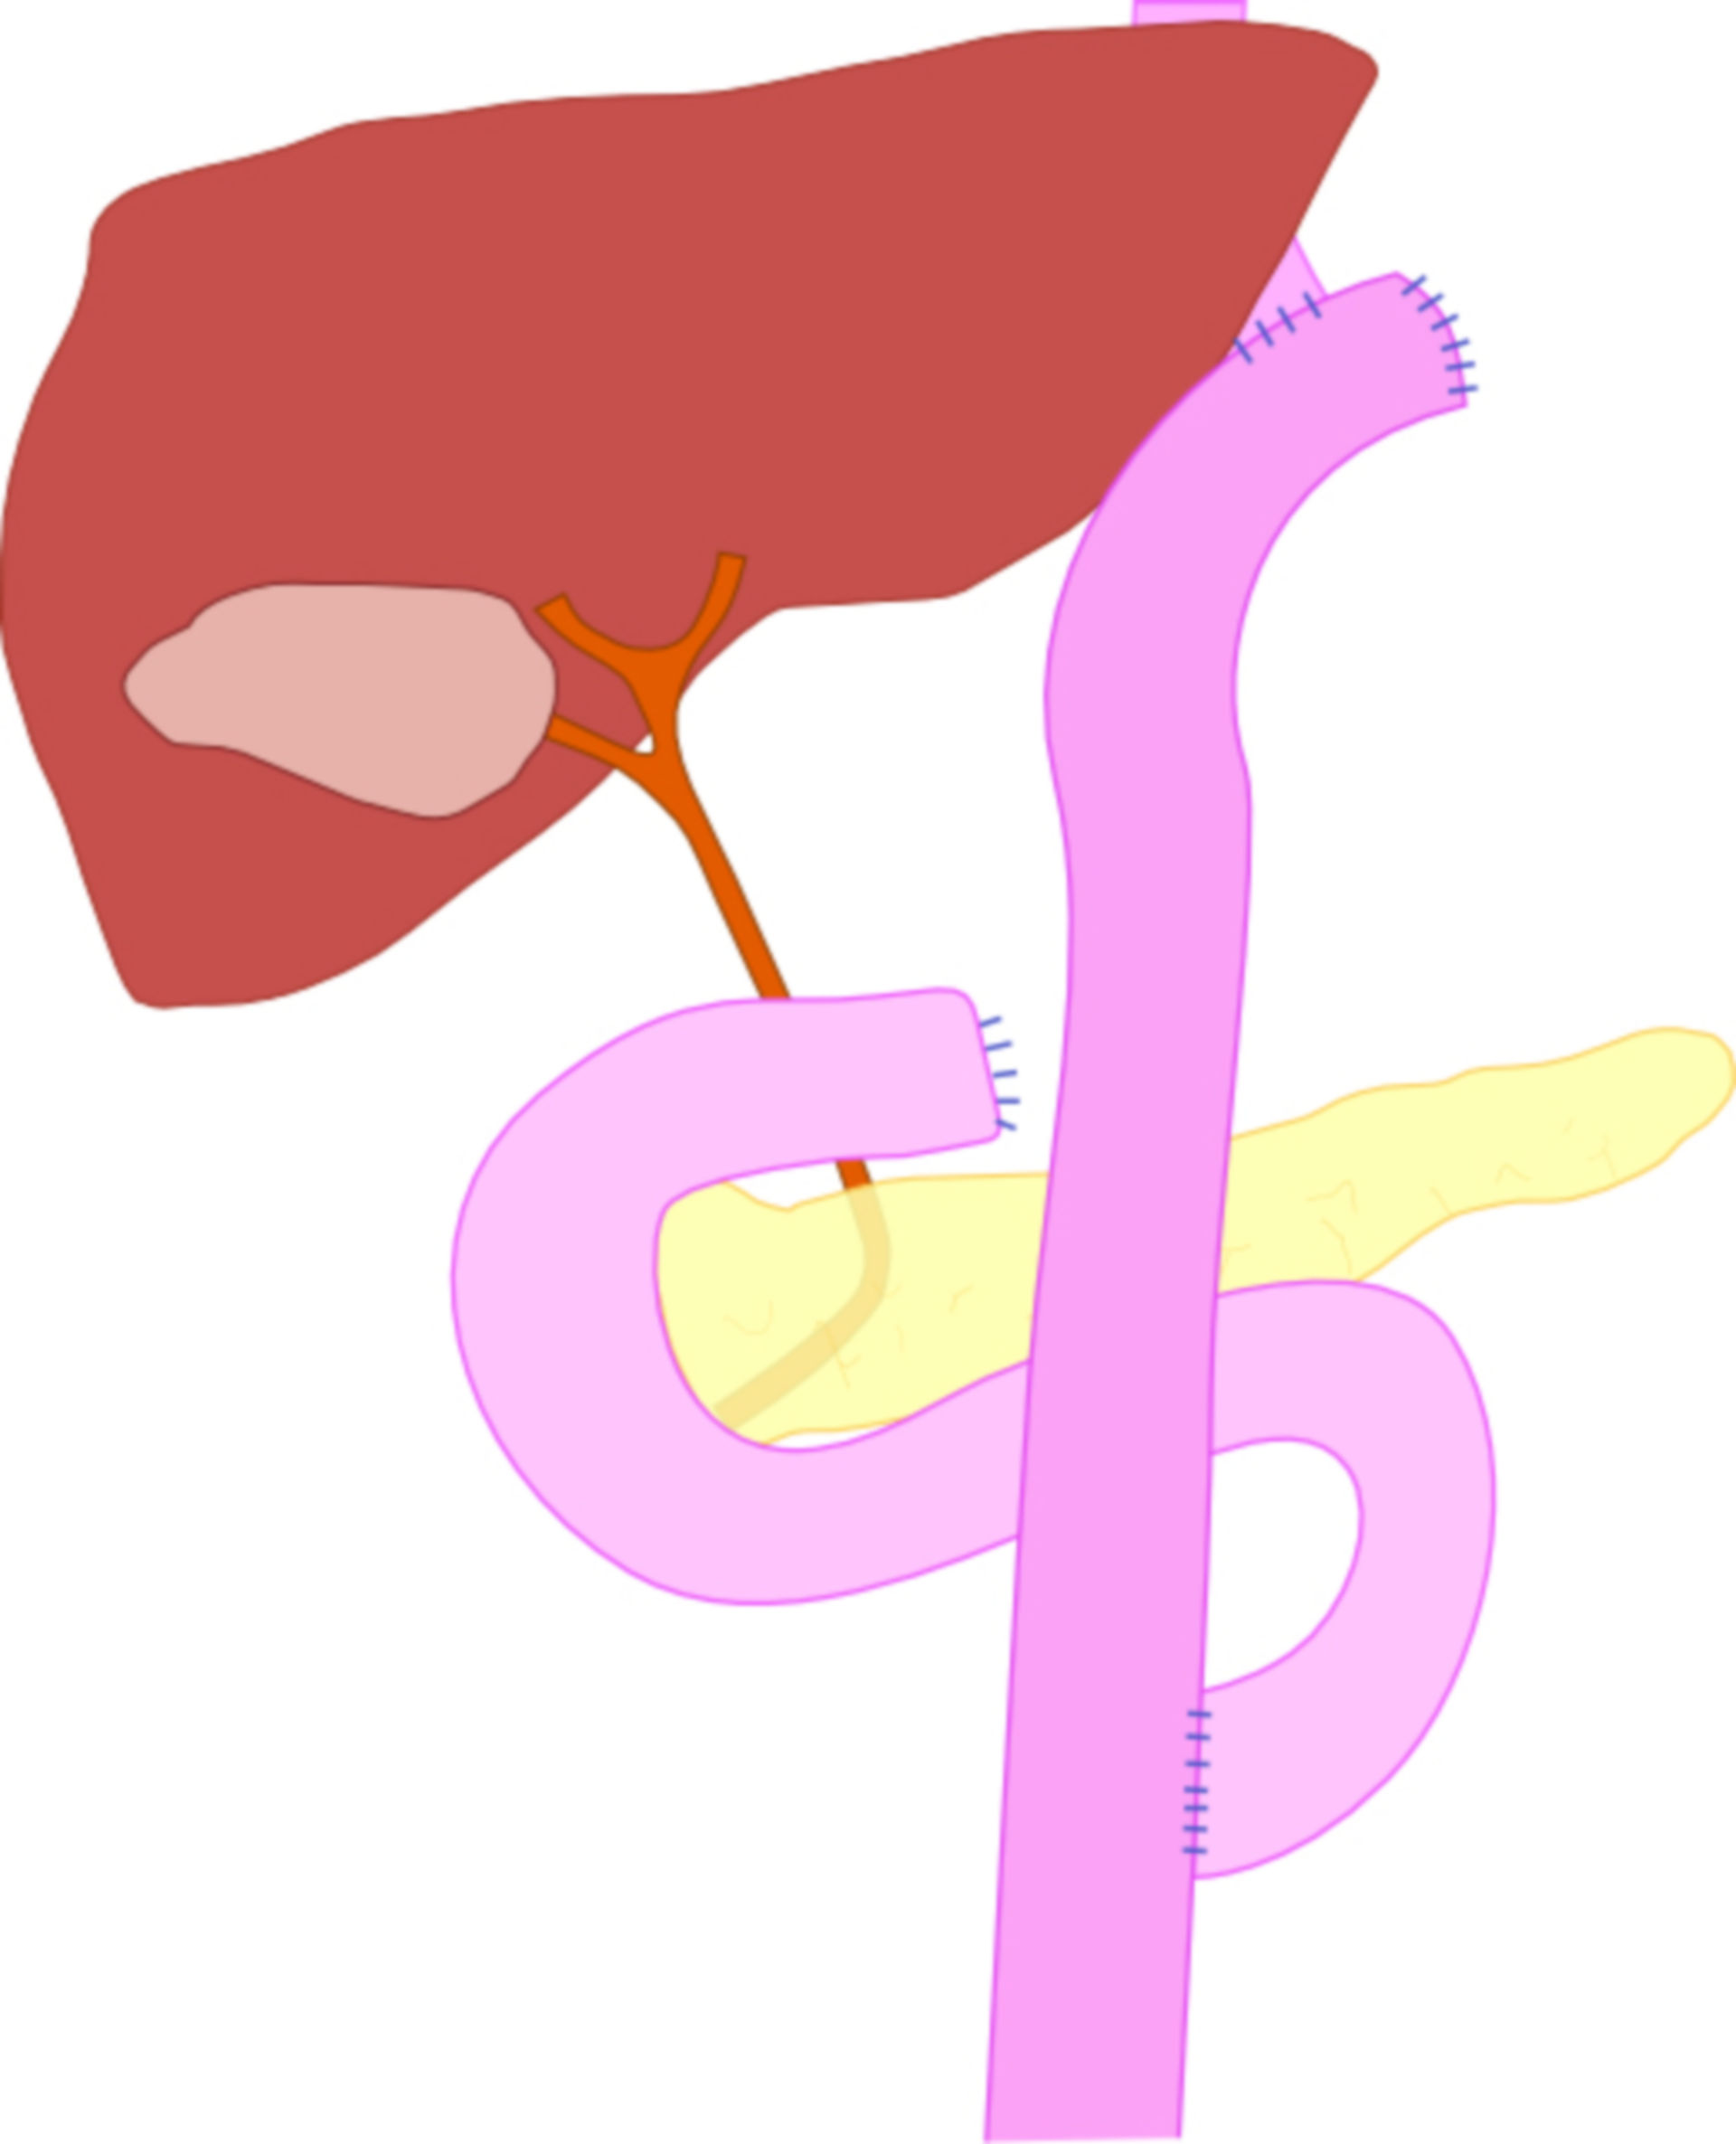 Gastric resection, Roux en-Y